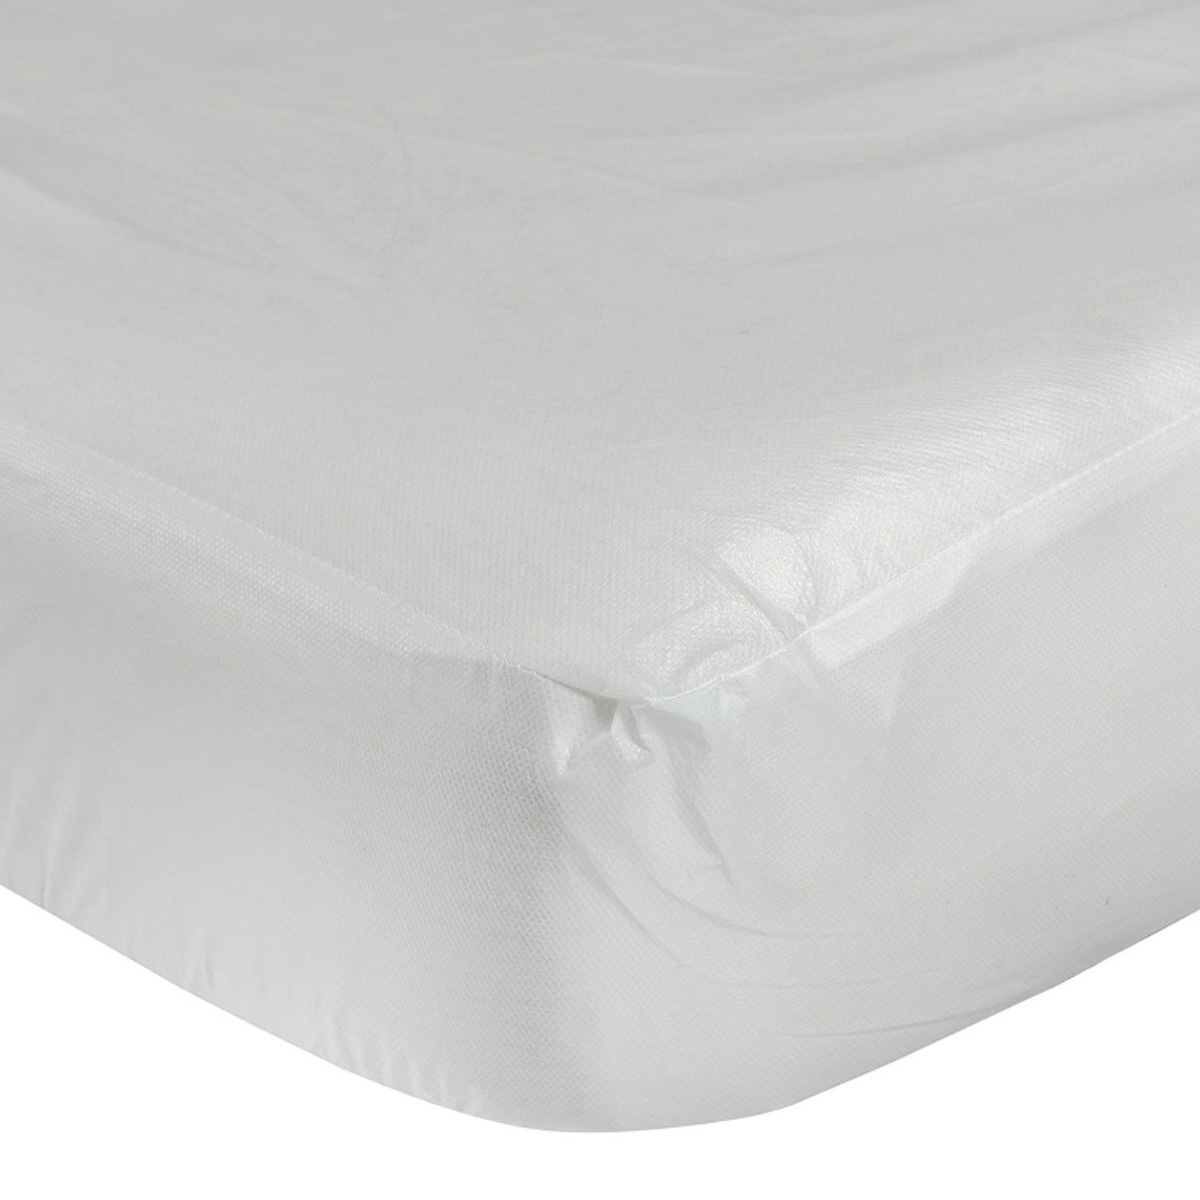 Economy Polypropylene Mattress Protector - Fitted - Double